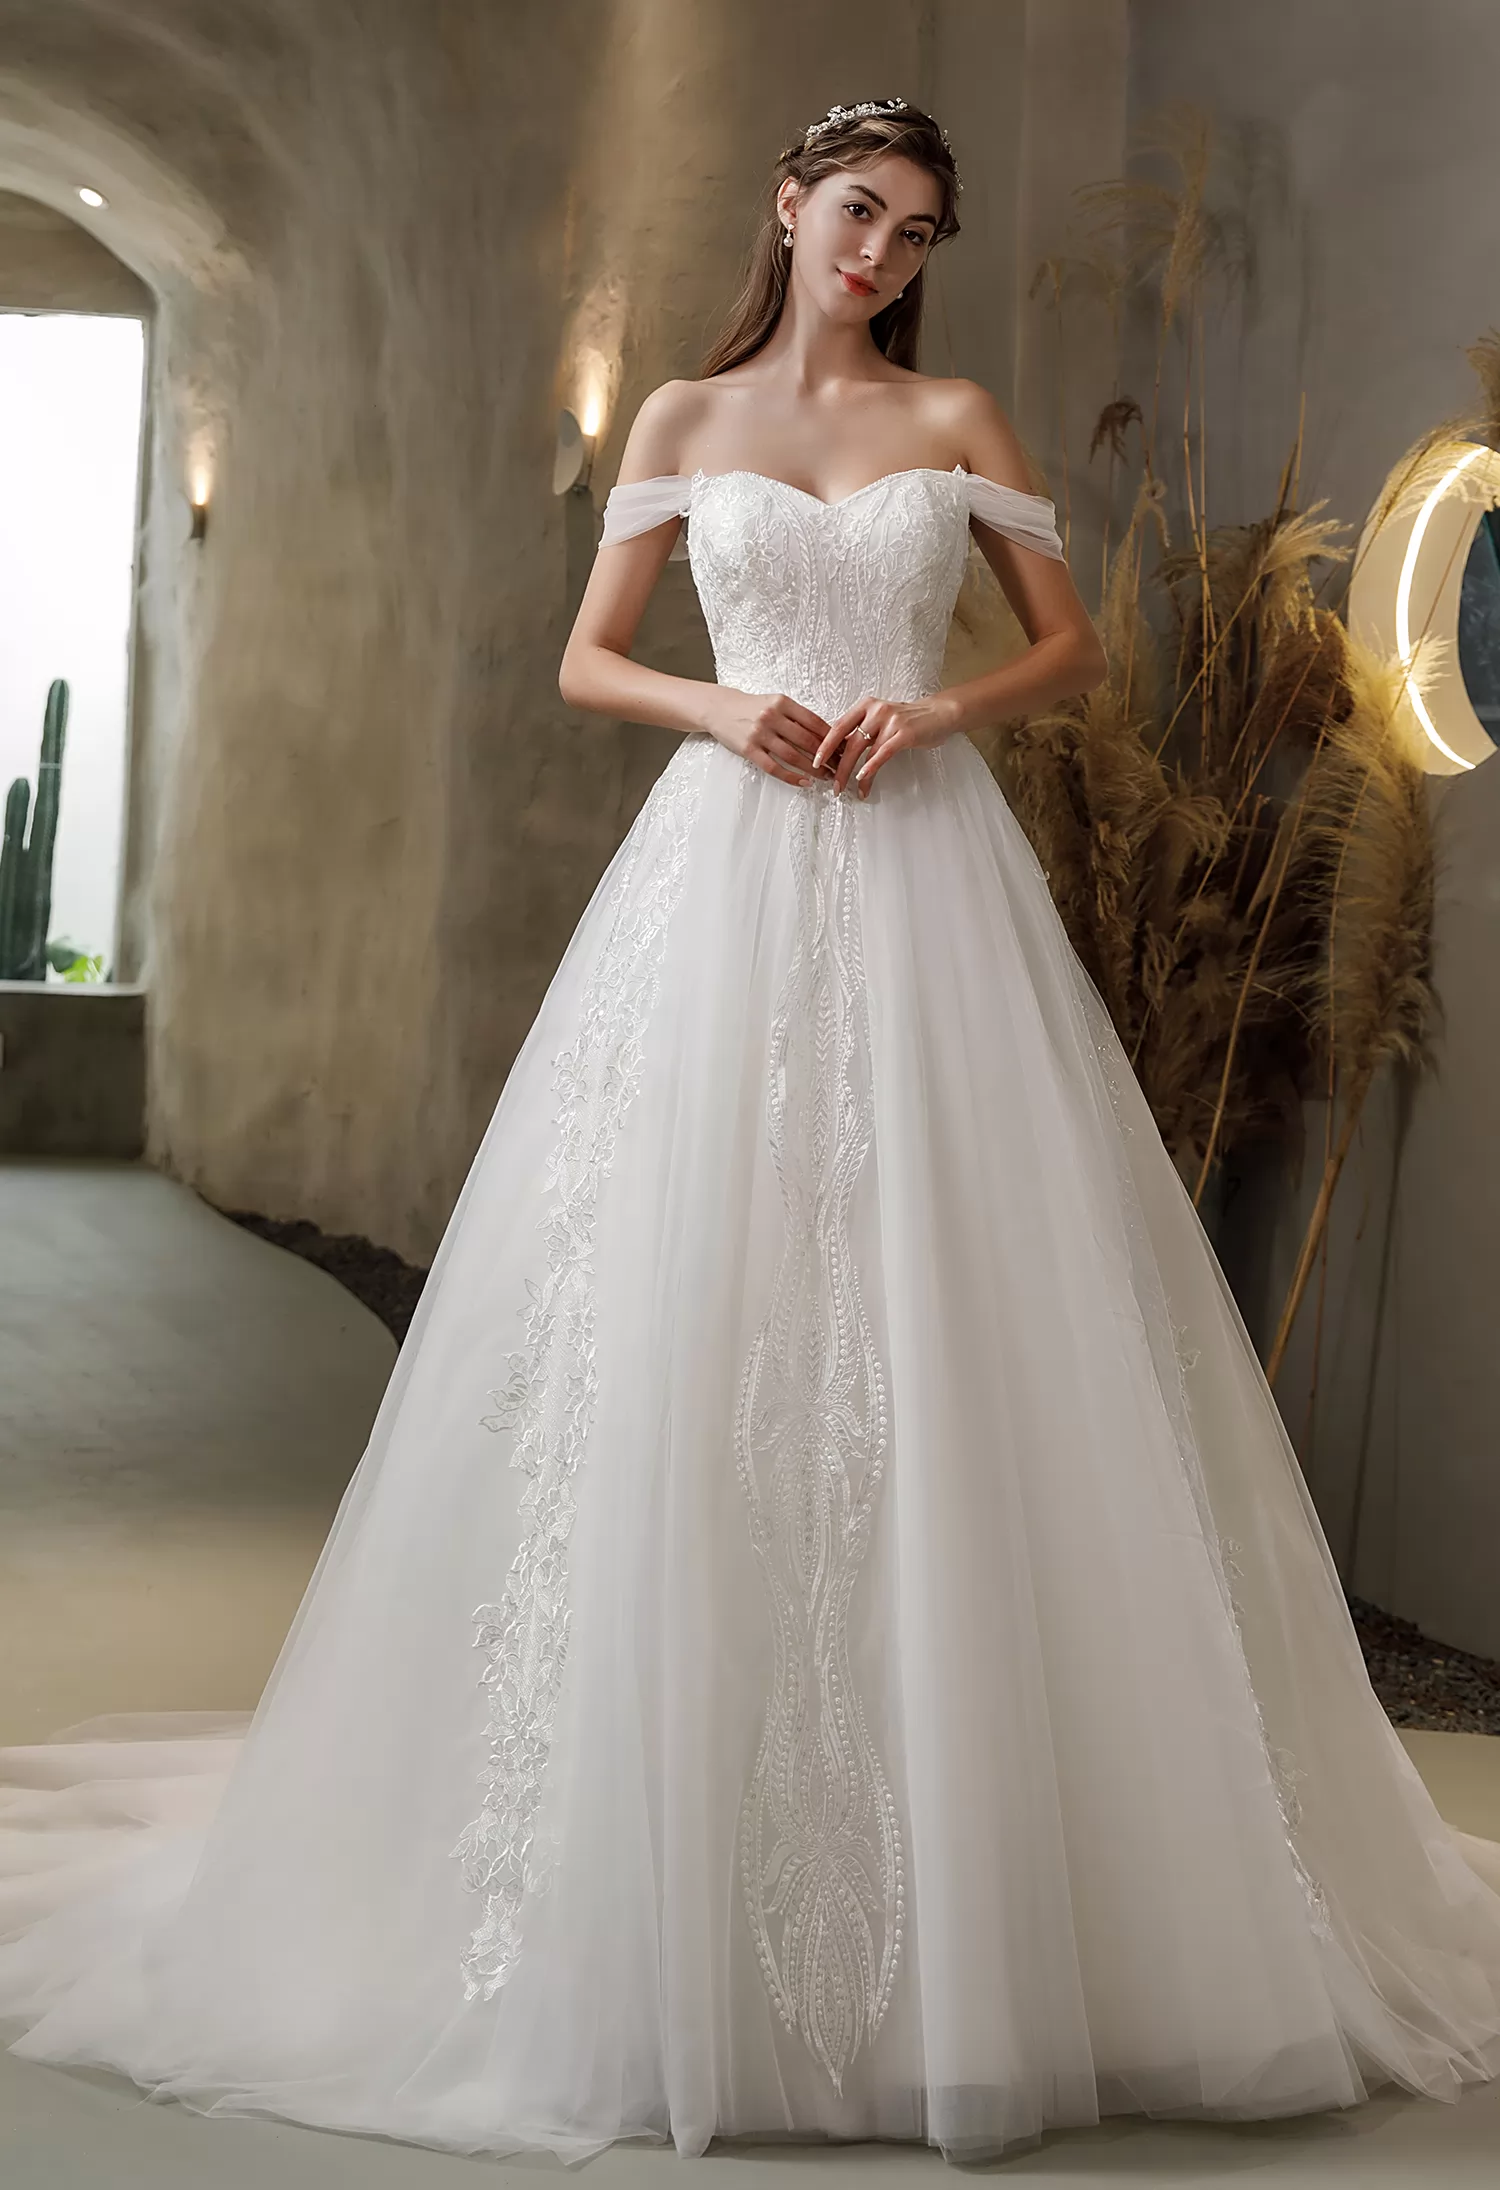 Princess Sweetheart Lace Tulle Ballgown Wedding Dress